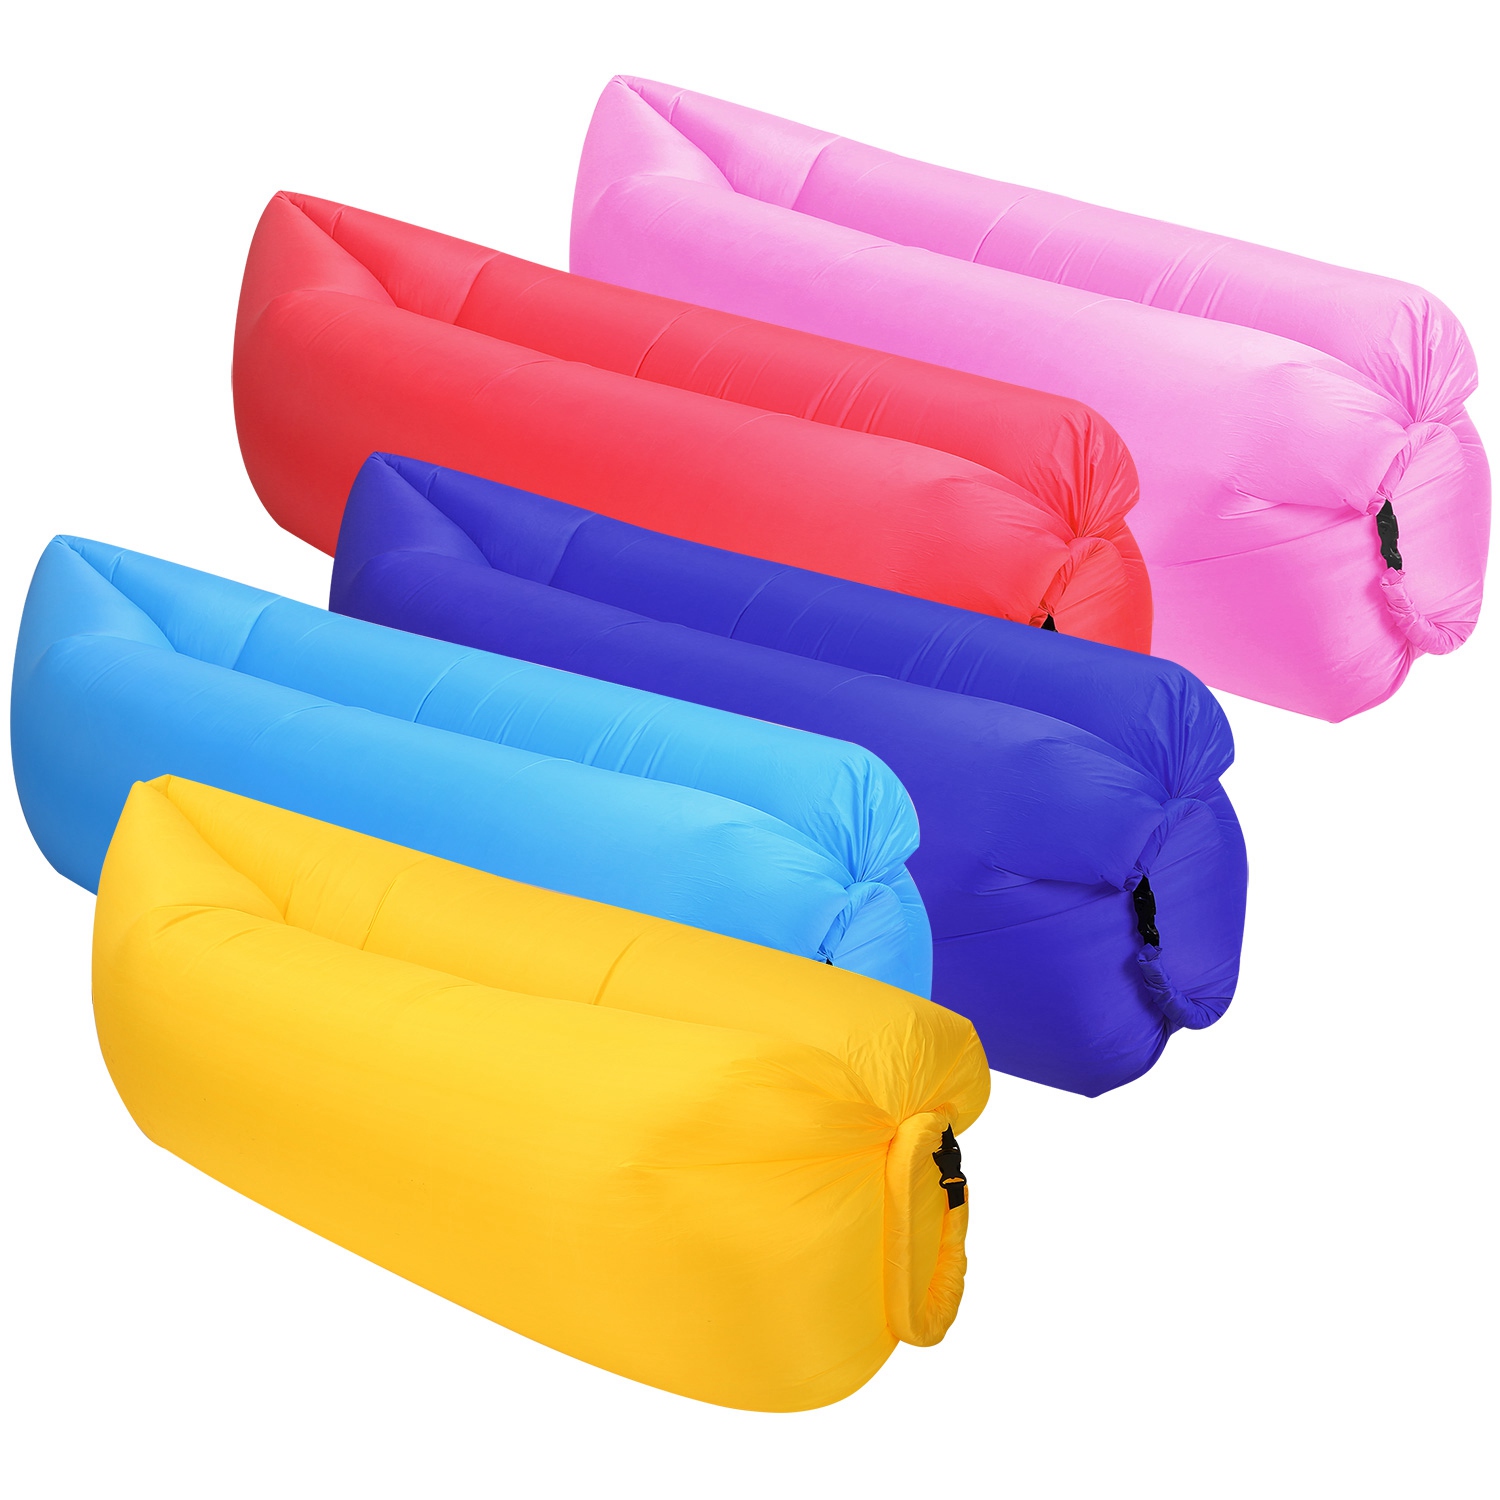 Inflatable Lounger Air Sofa Lazy Bed Sofa w/ Portable Organizing Bag ...